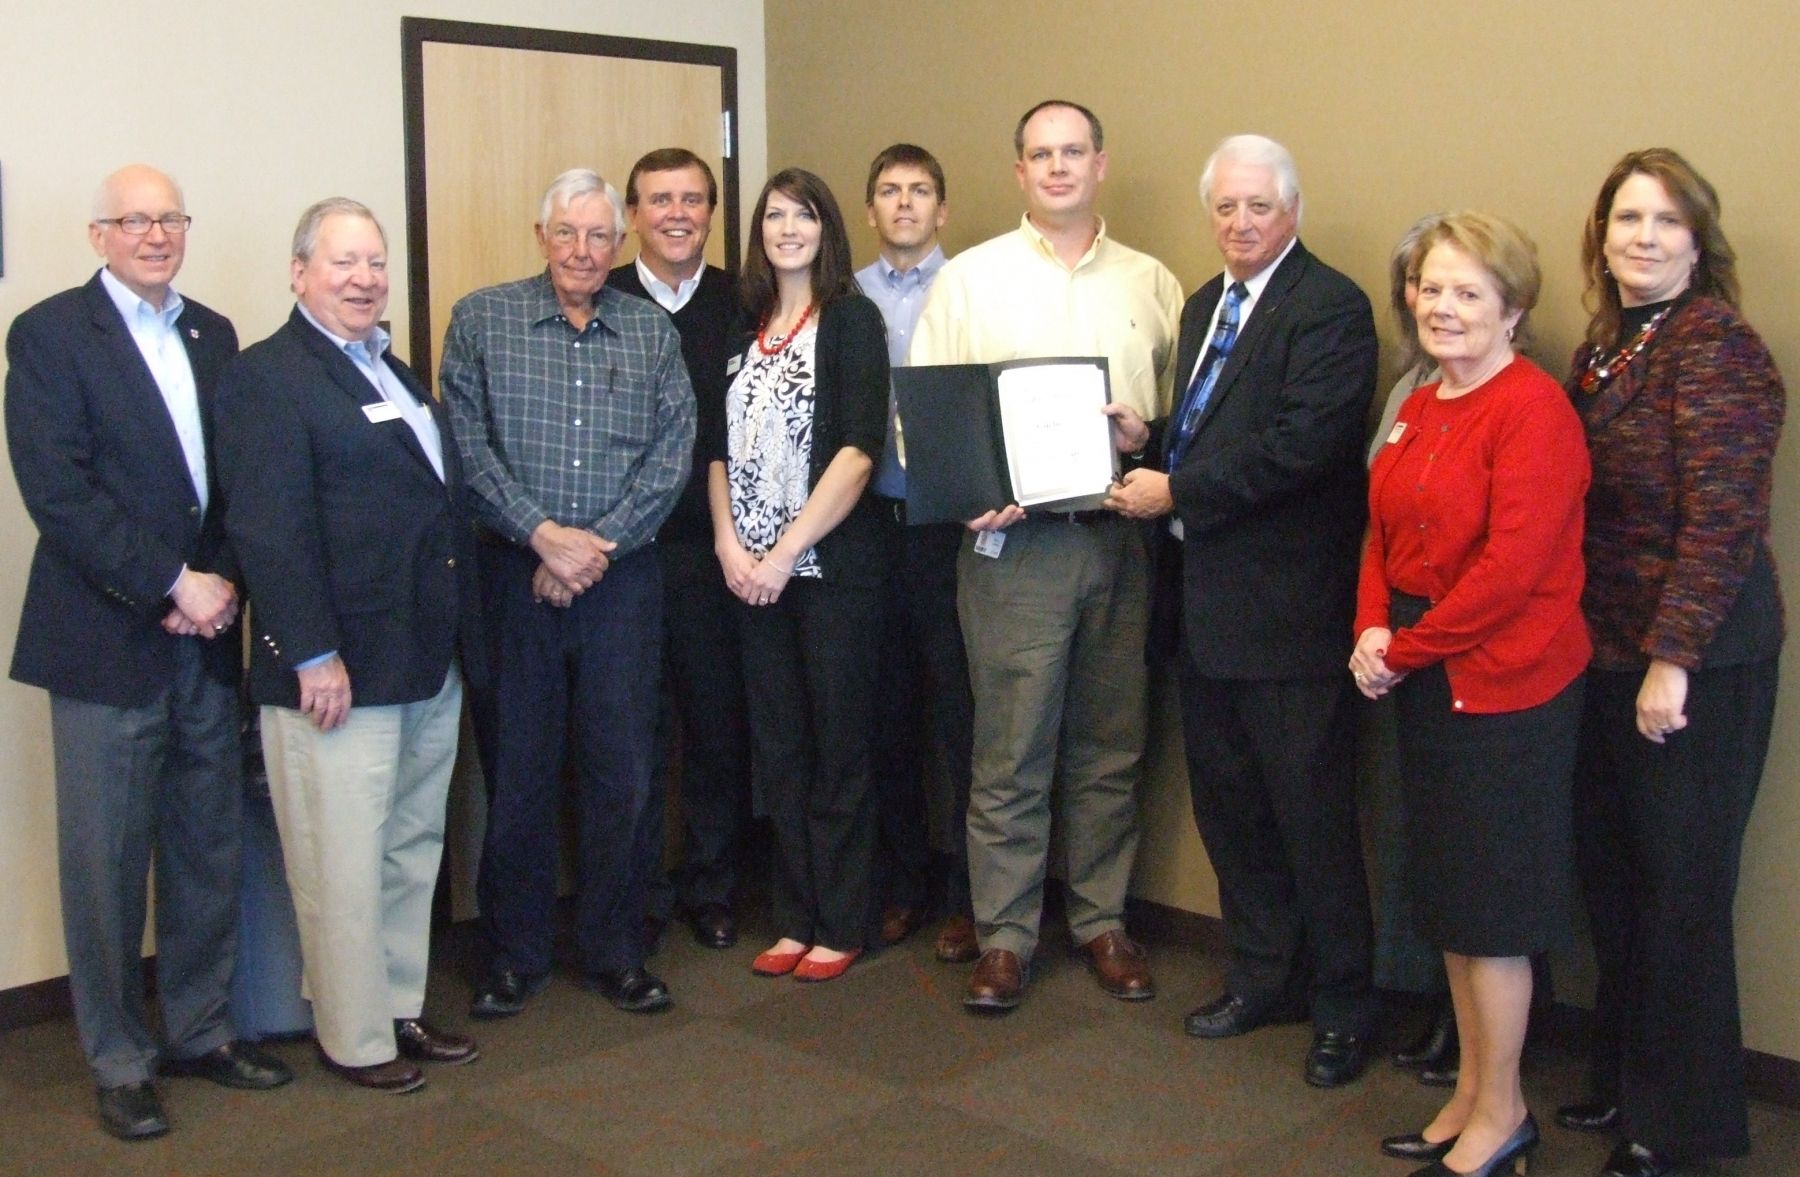 Workforce Essentials and the Tennessee Department of Labor presents awards and formal recognition to locals